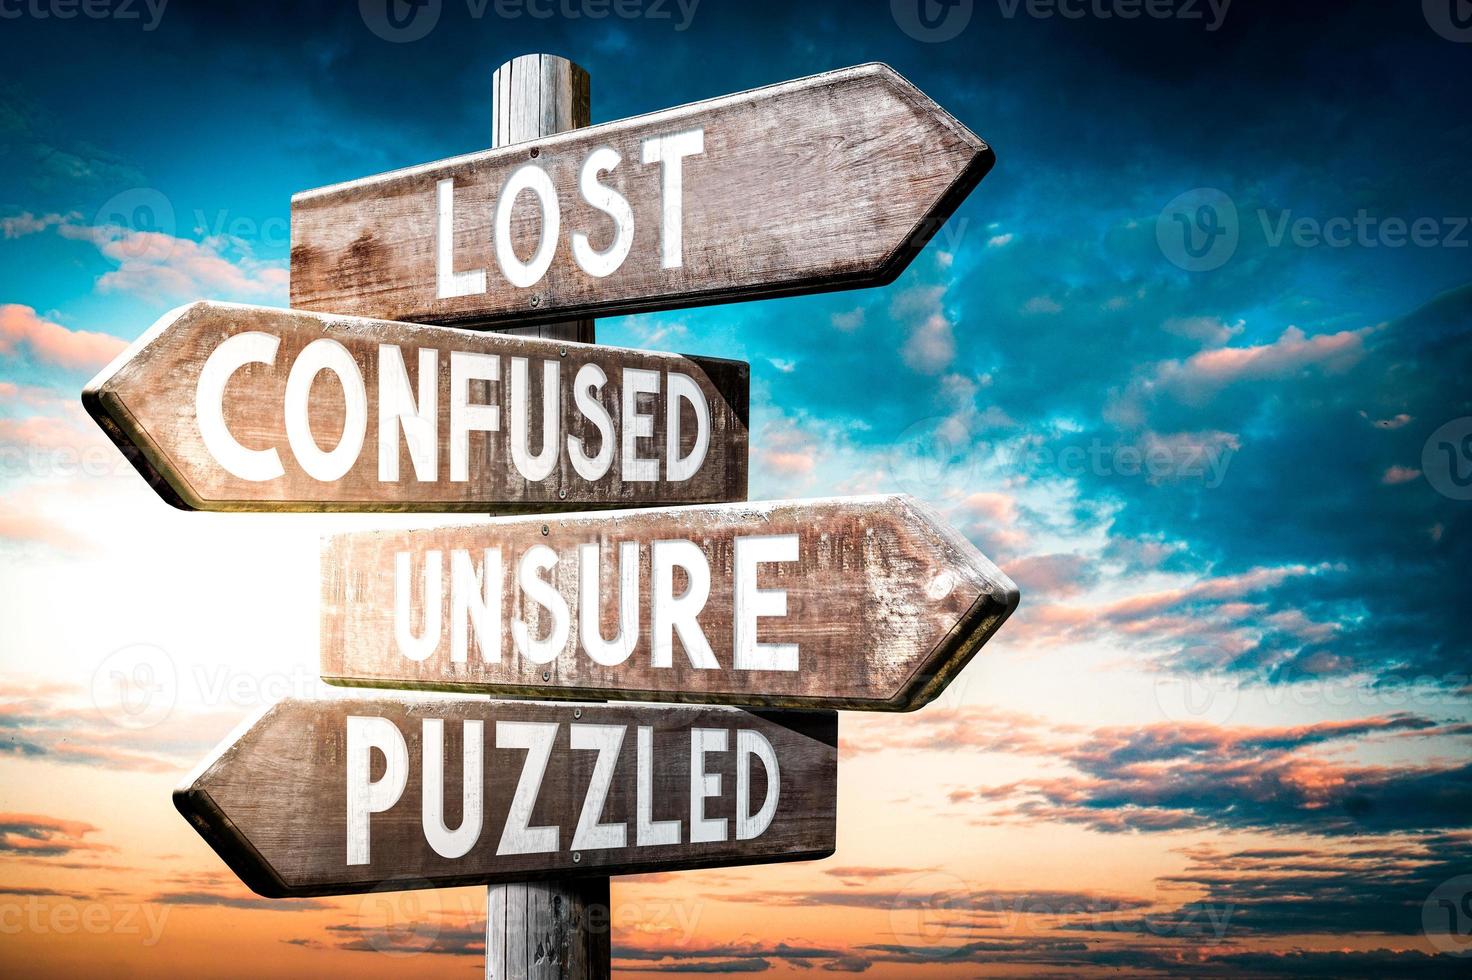 Lost, Confused, Unsure, Puzzled - Wooden Signpost with Four Arrows, Sunset Sky in Background photo